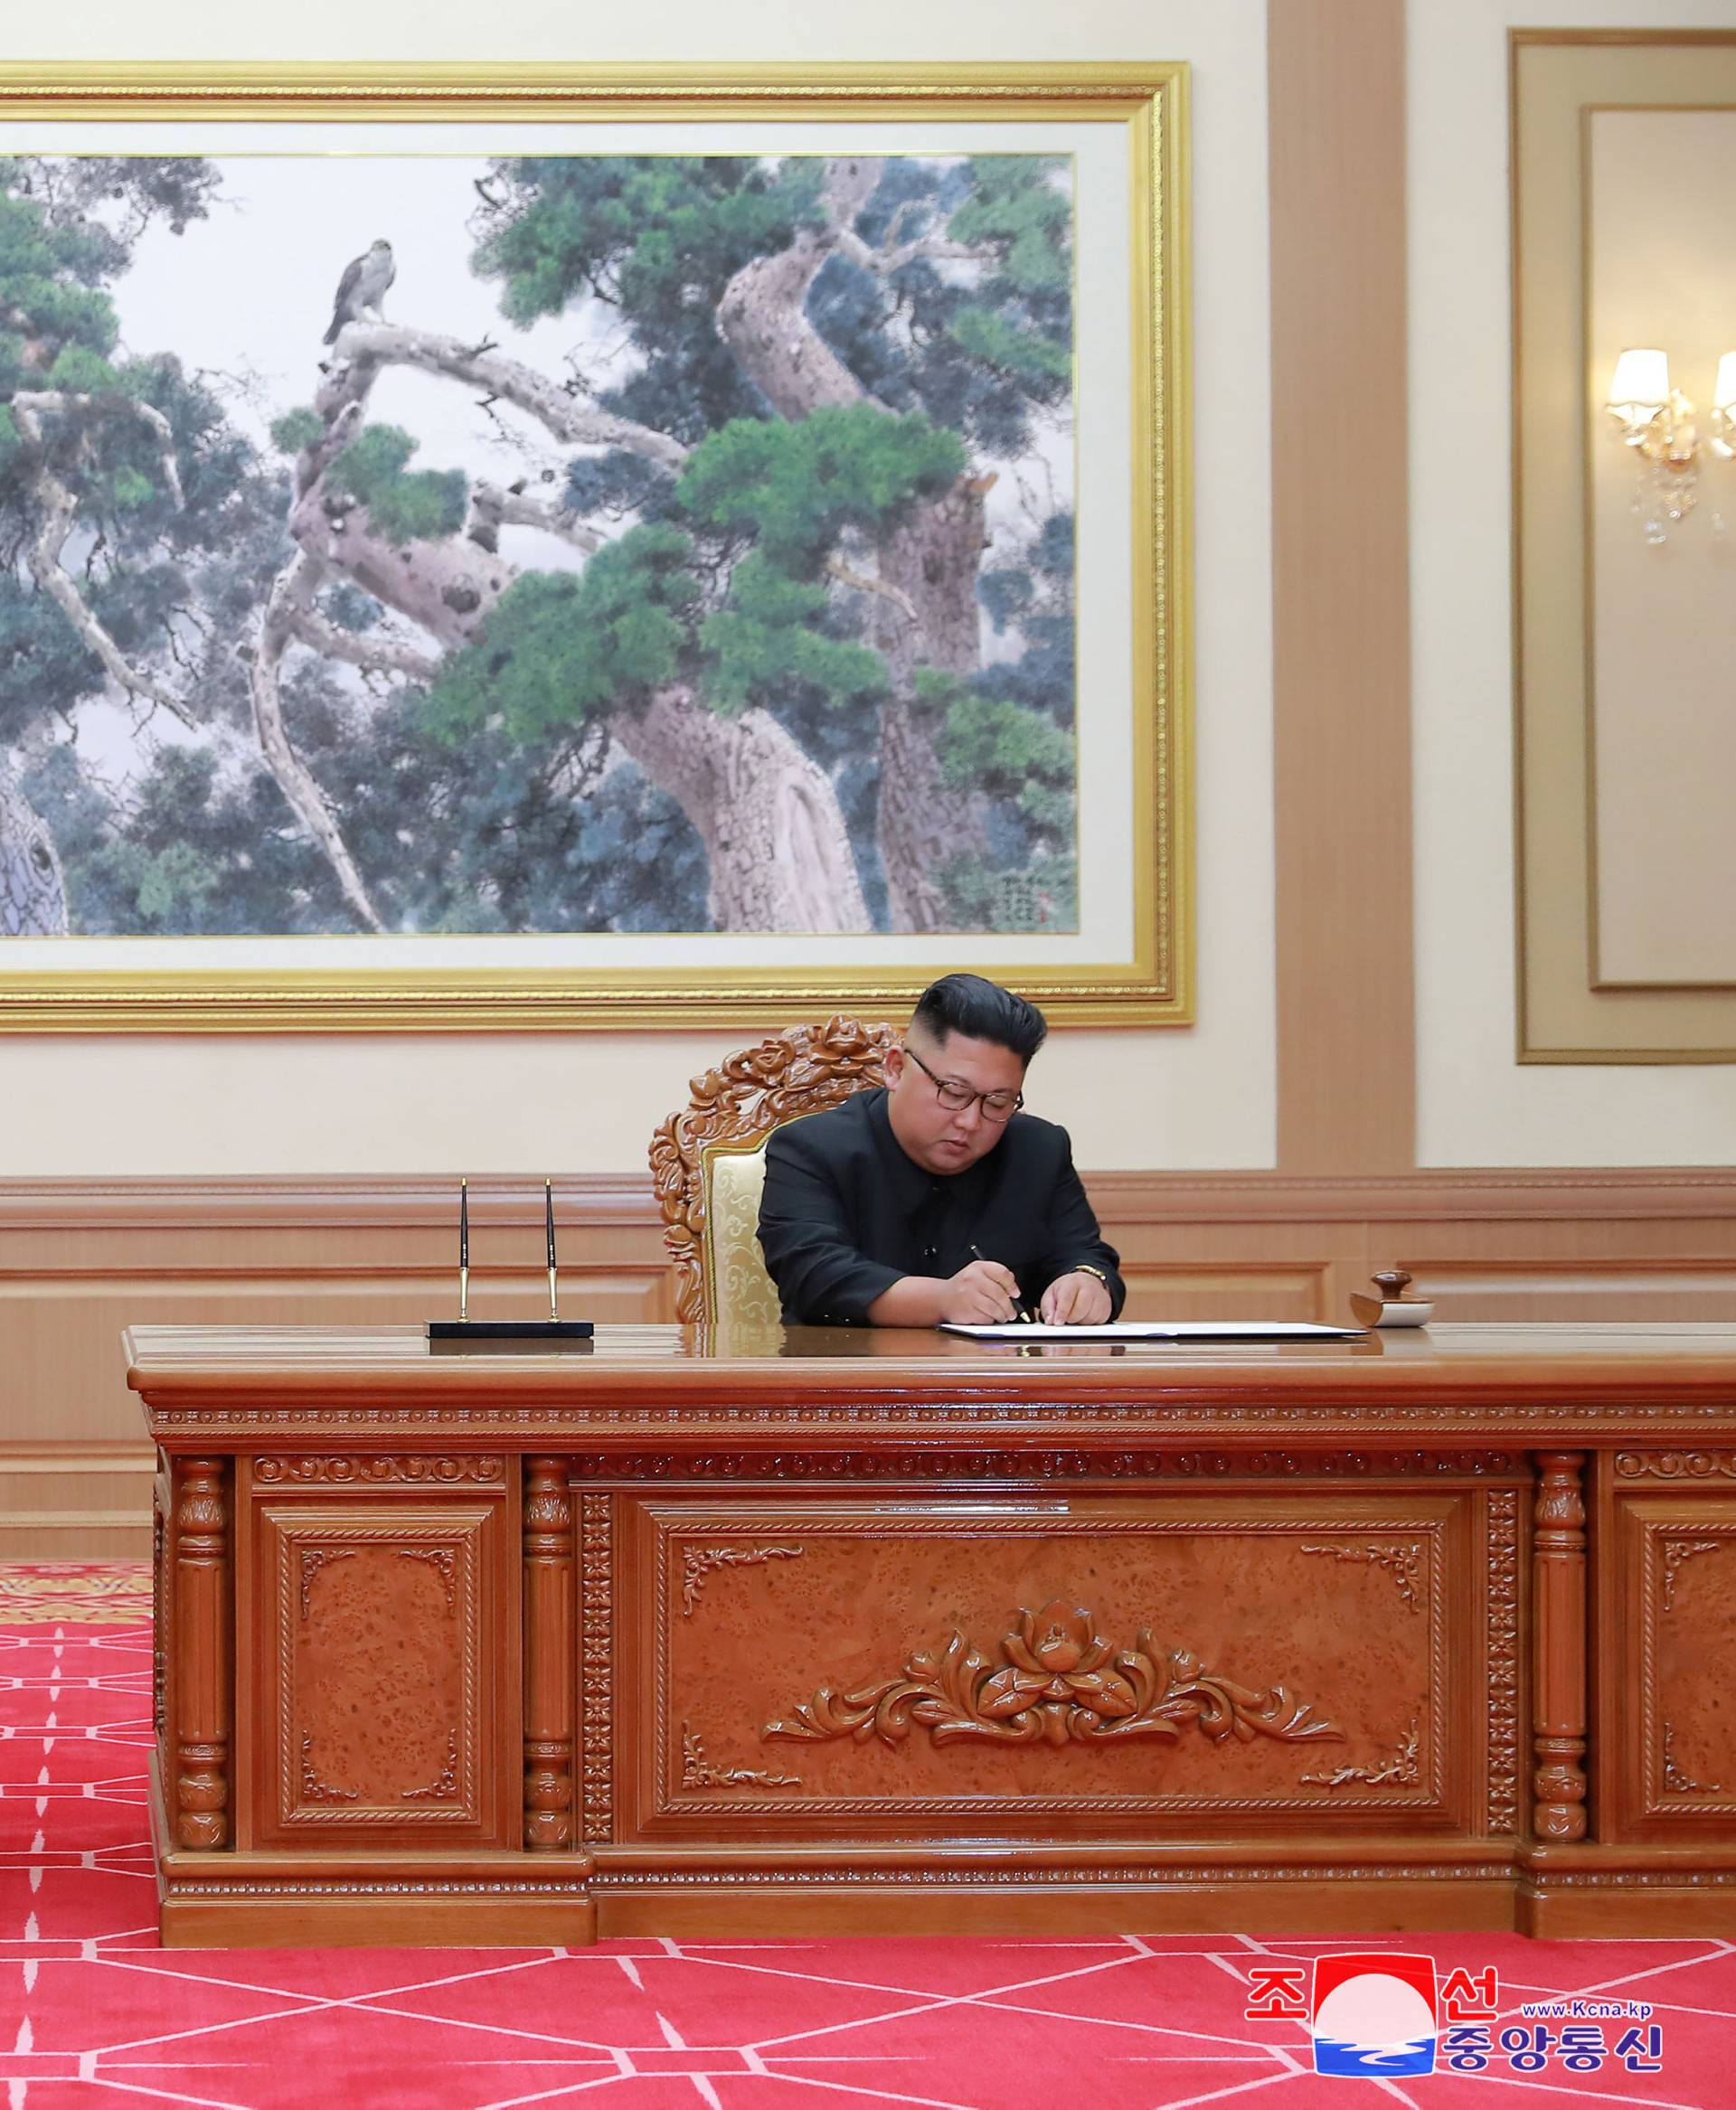 South Korean President Moon Jae-in and North Korean leader Kim Jong Un sign a joint statement in Pyongyang in this photo released by North Korea's Korean Central News Agency